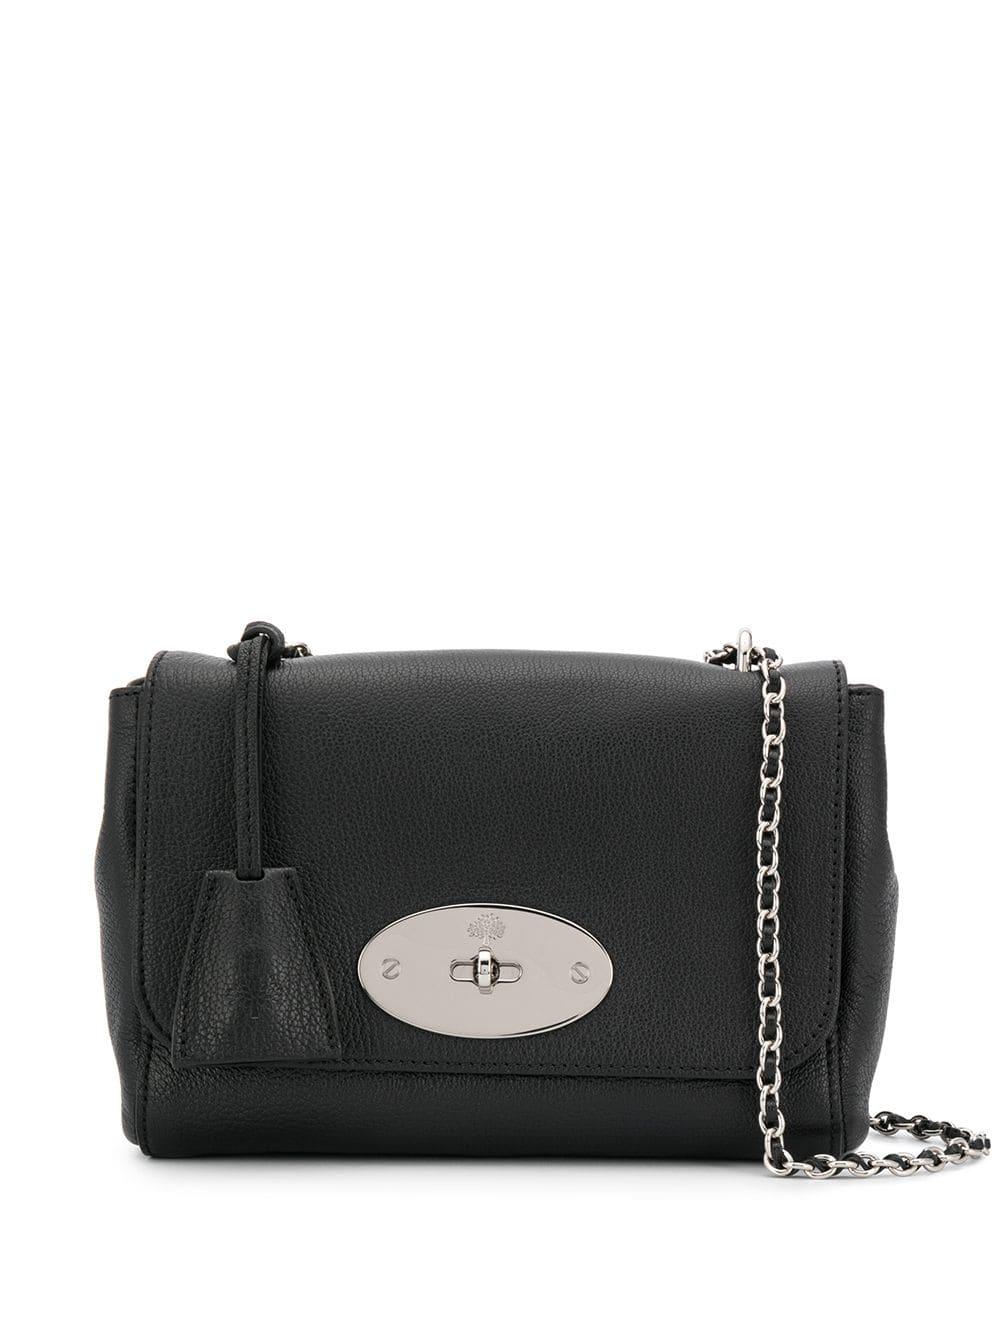 Mulberry Leather Chain Strap Shoulder Bag in Black - Lyst